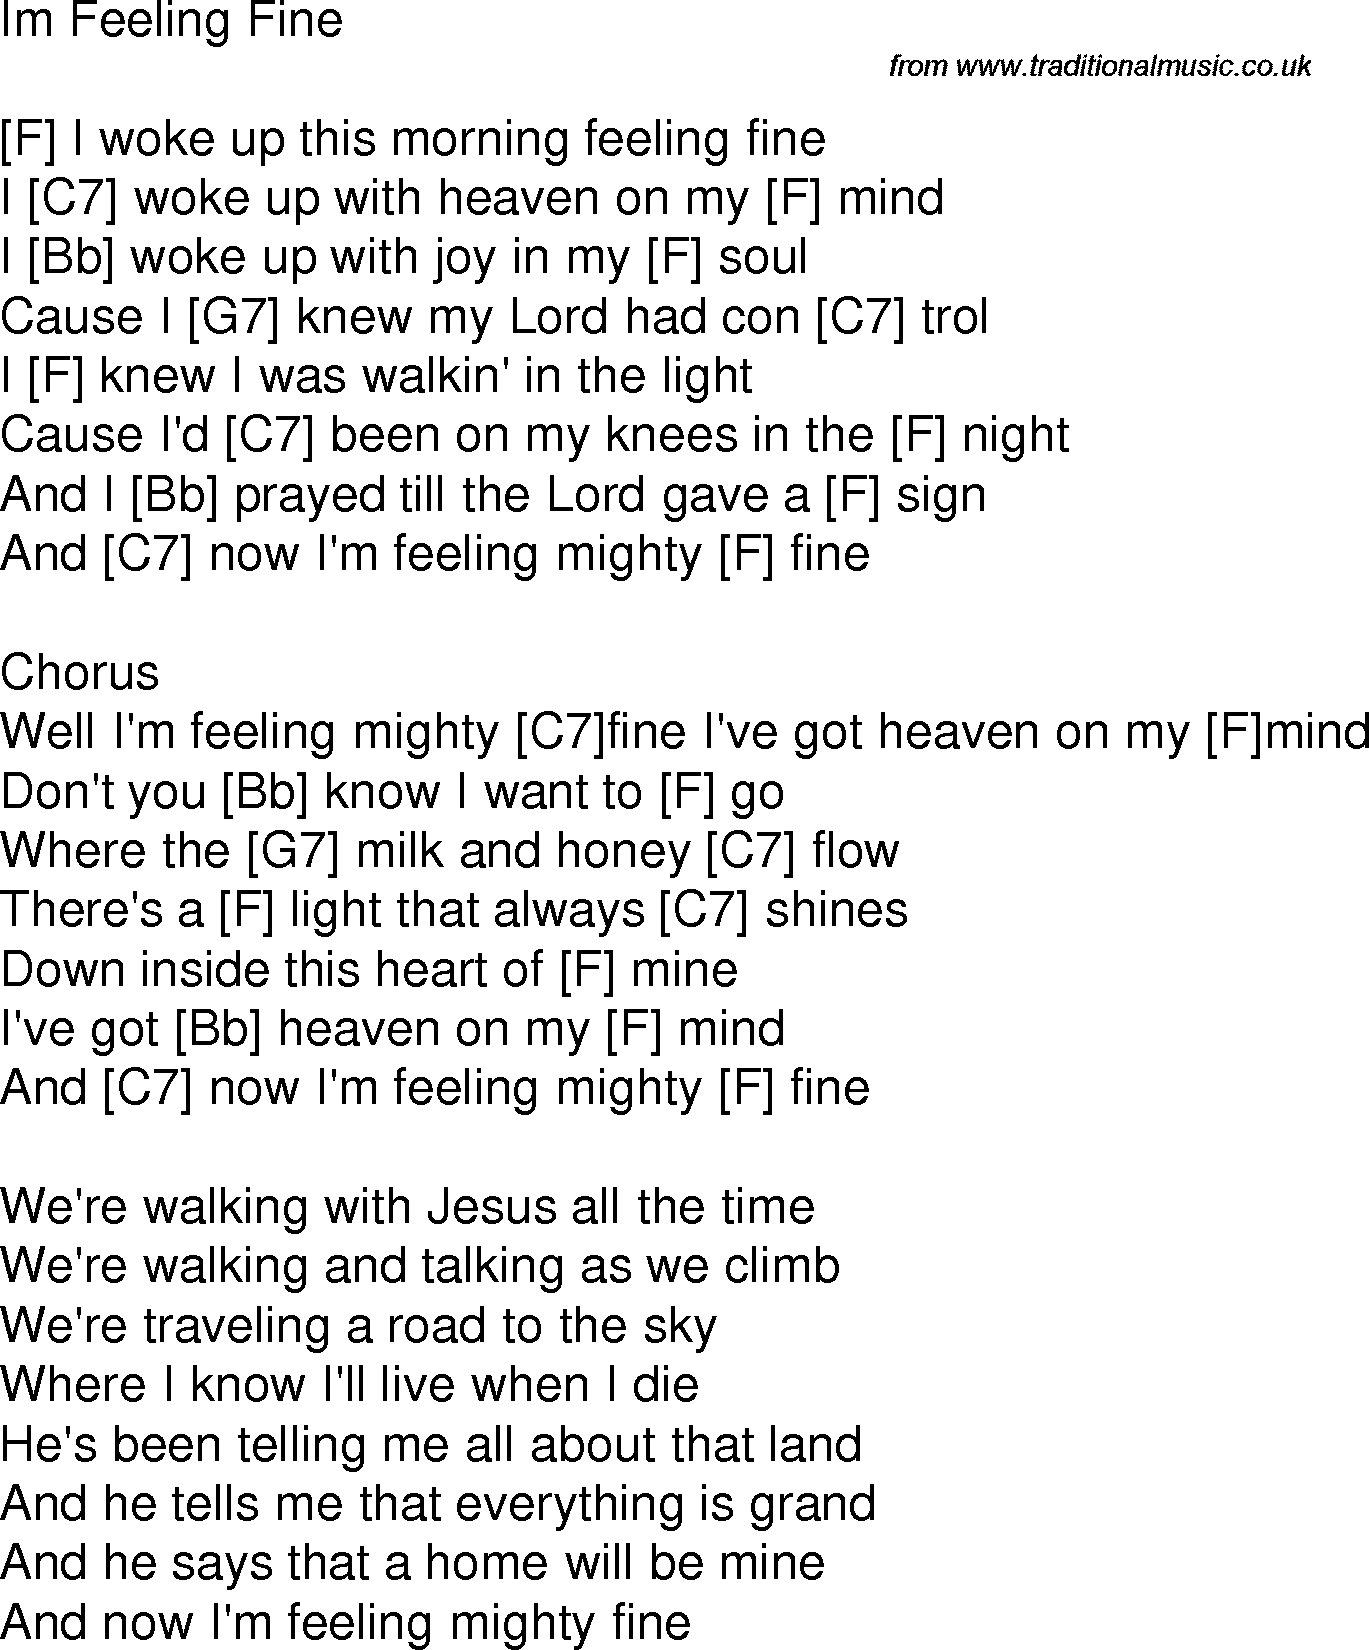 Old time song lyrics with chords for I'm Feeling Fine F